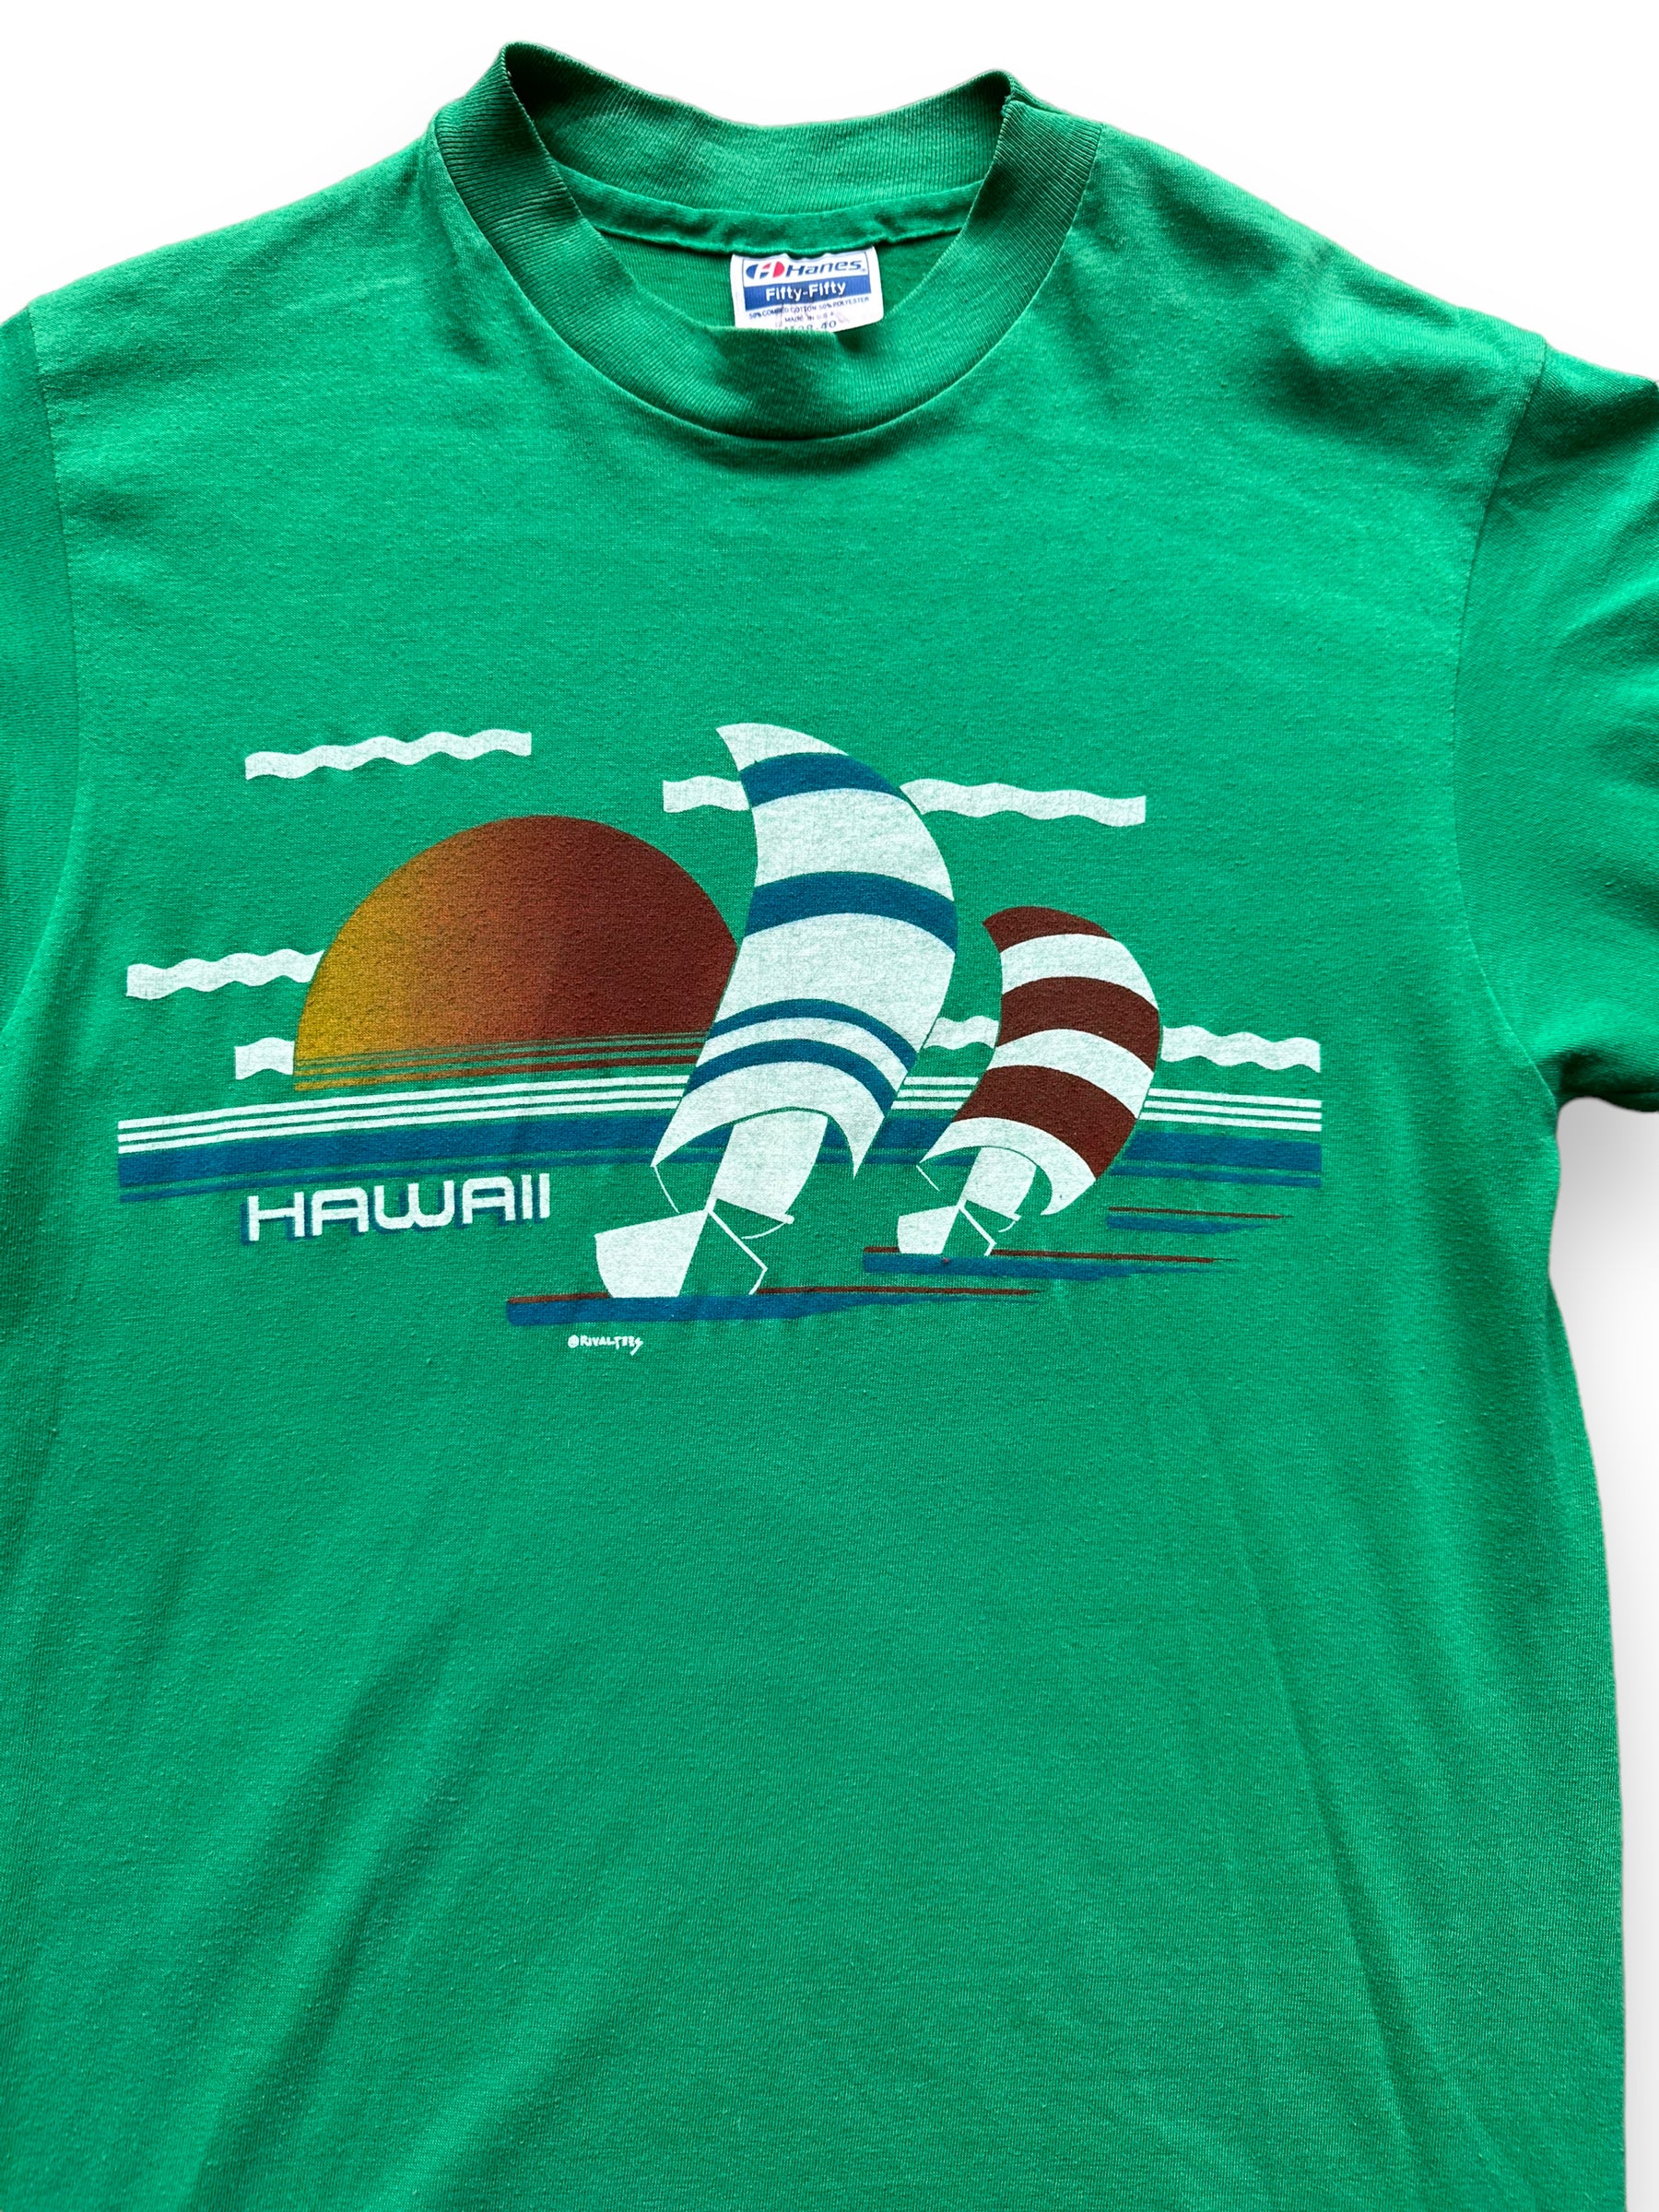 Front Upper View of Vintage Green Hawaii Graphic Tee SZ M | Vintage T-Shirts Seattle | Barn Owl Vintage Tees Seattle